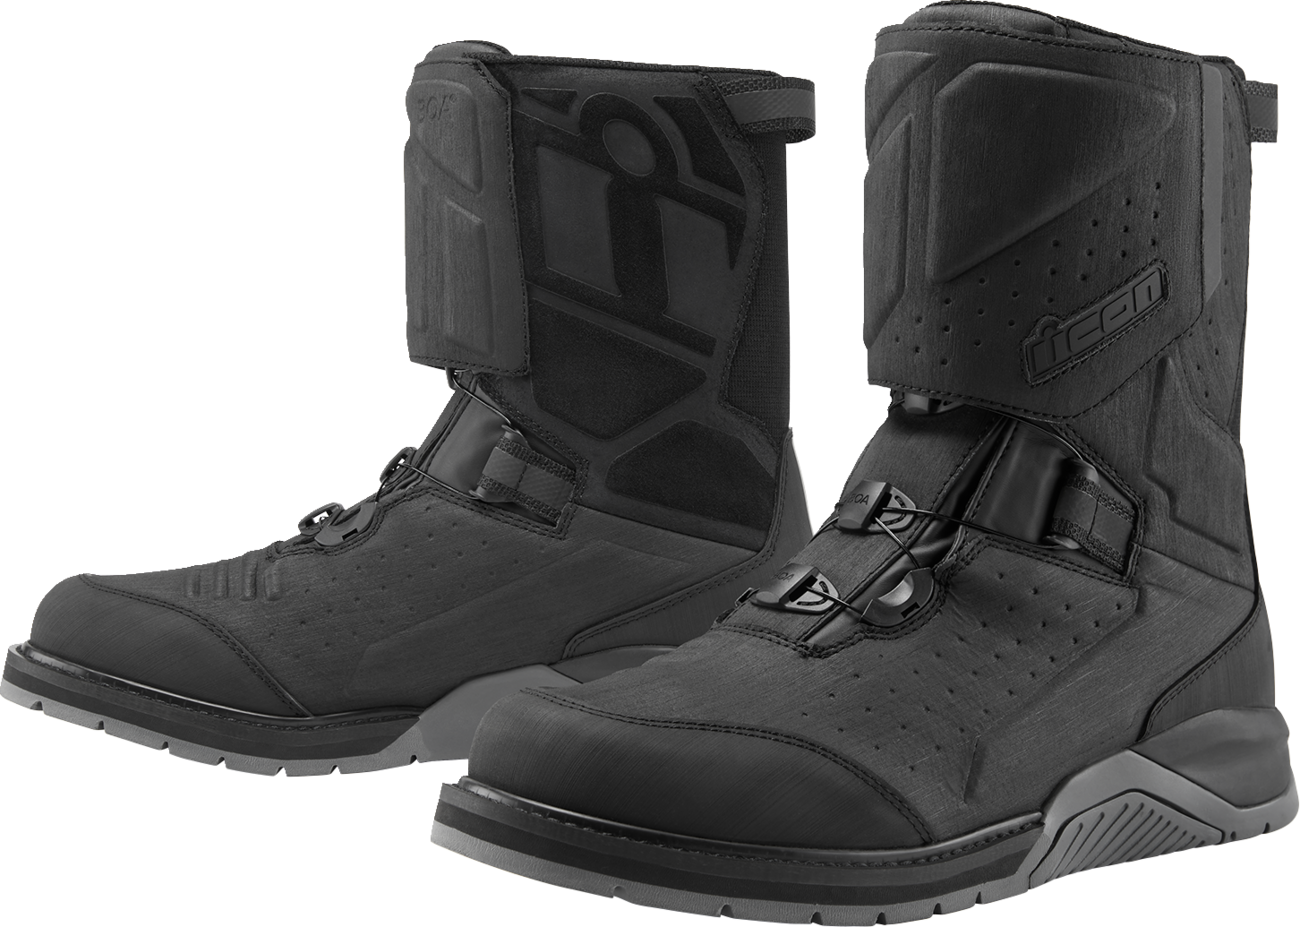 ICON Alcan Waterproof Boots - Black - Size 9 3403-1235